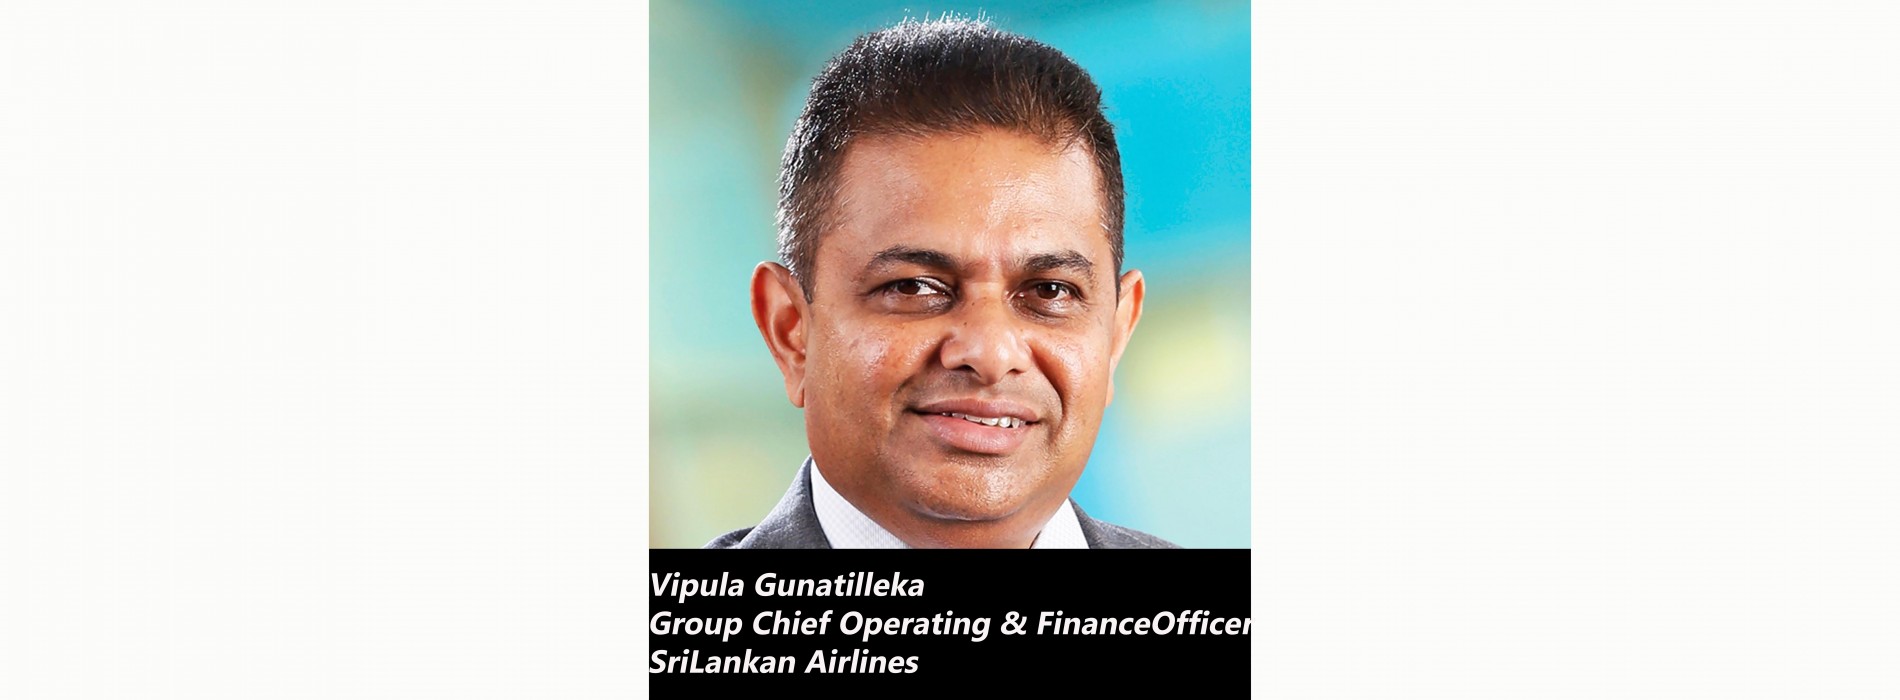 Vipula Gunatilleka appointed Group Chief Operating & Finance Officer of SriLankan Airlines